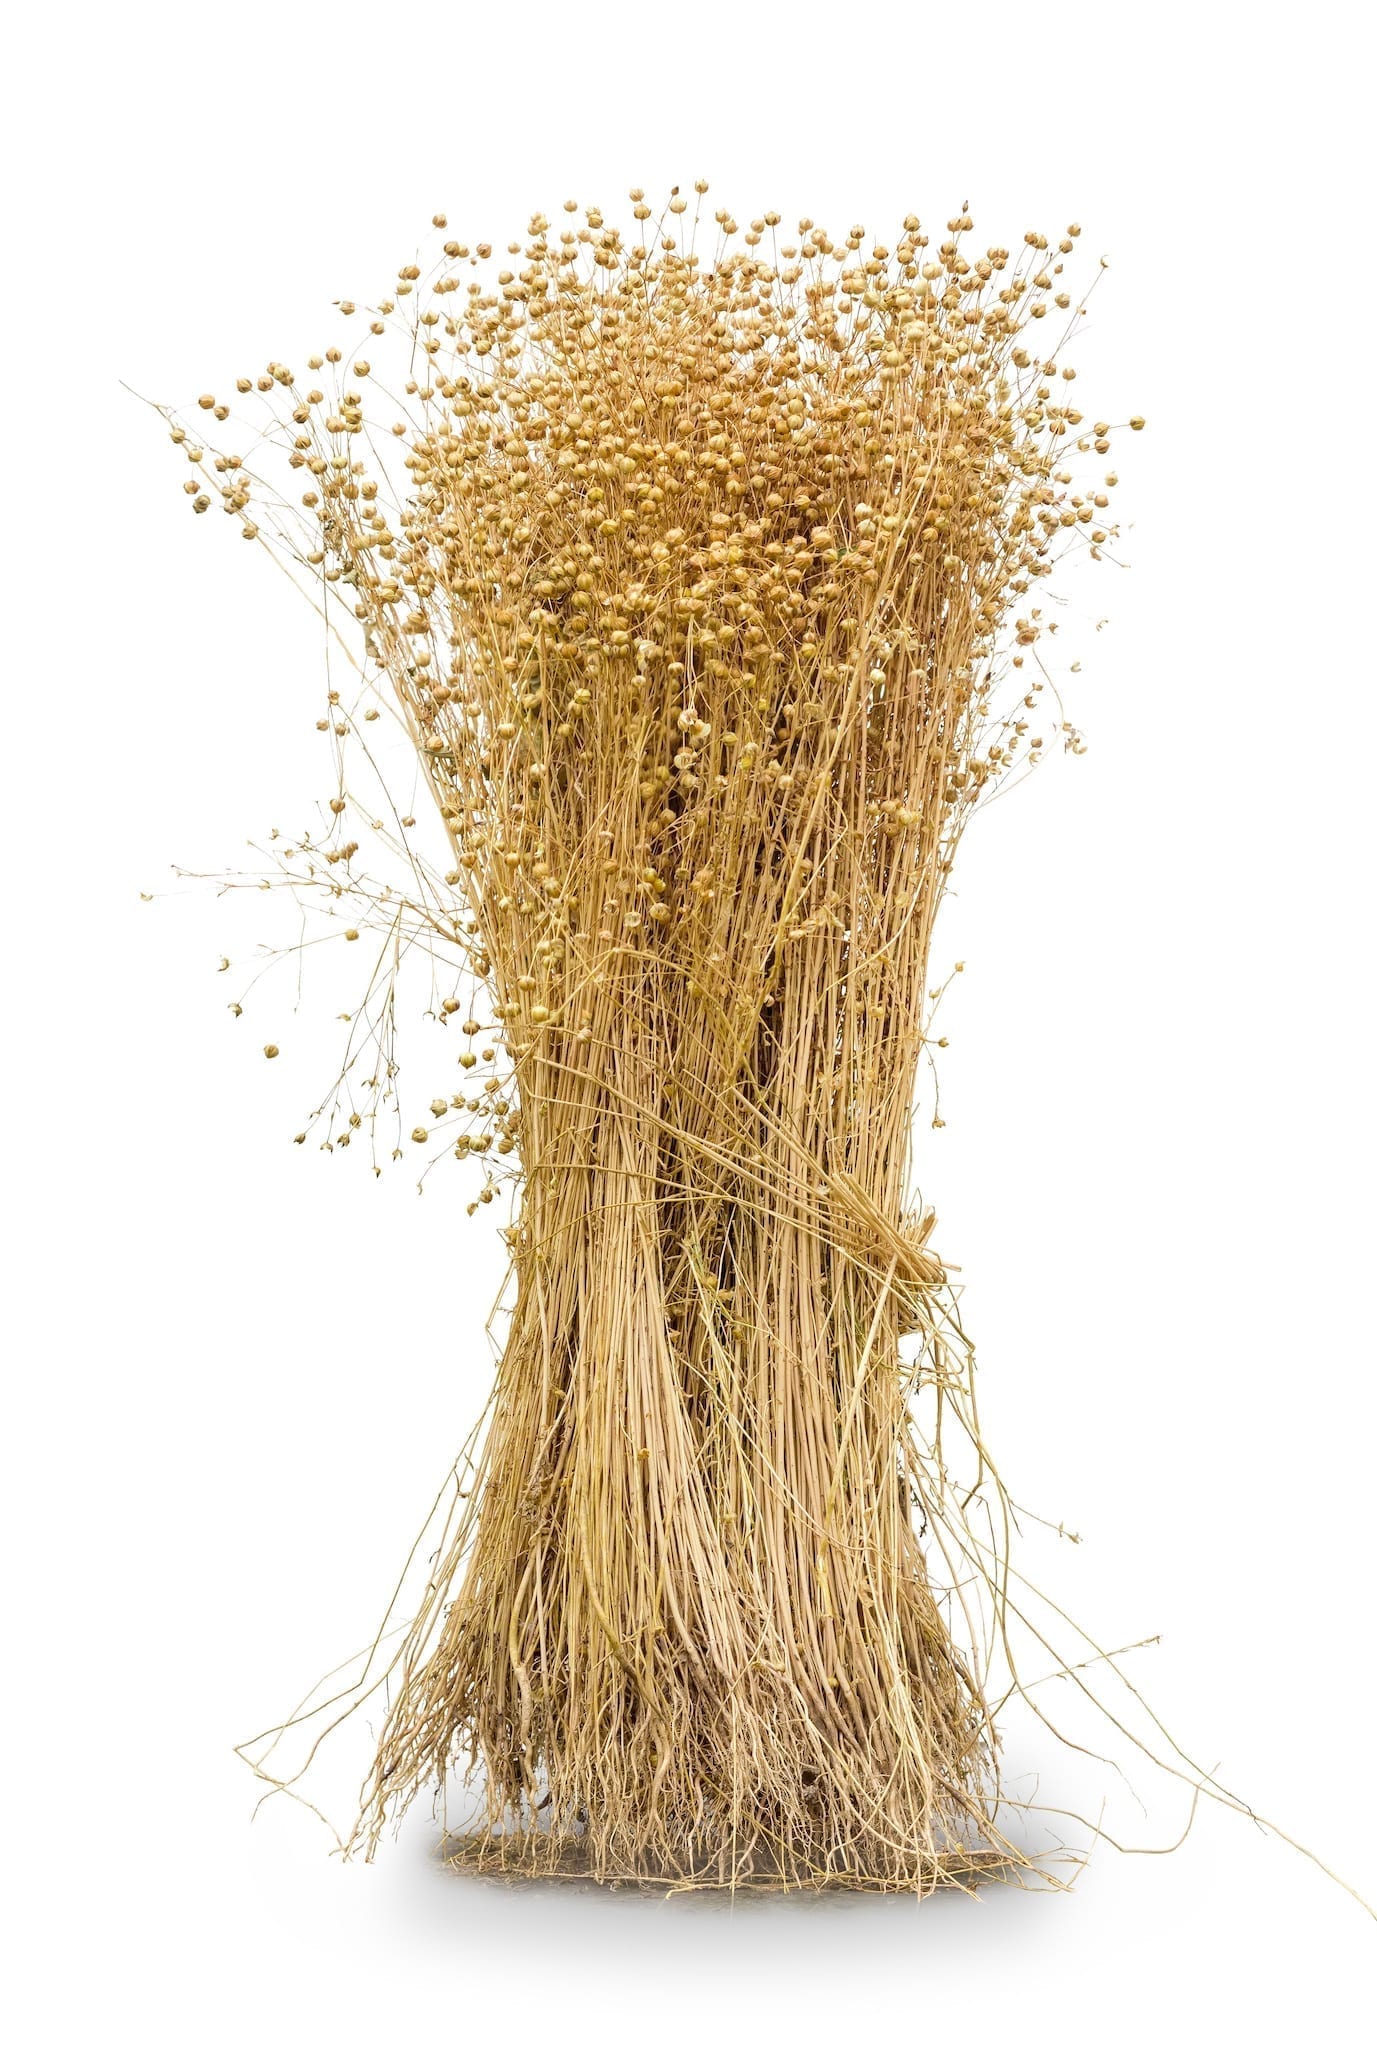 Sheaf of the harvested flax with stems, seed capsules and roots on a white background